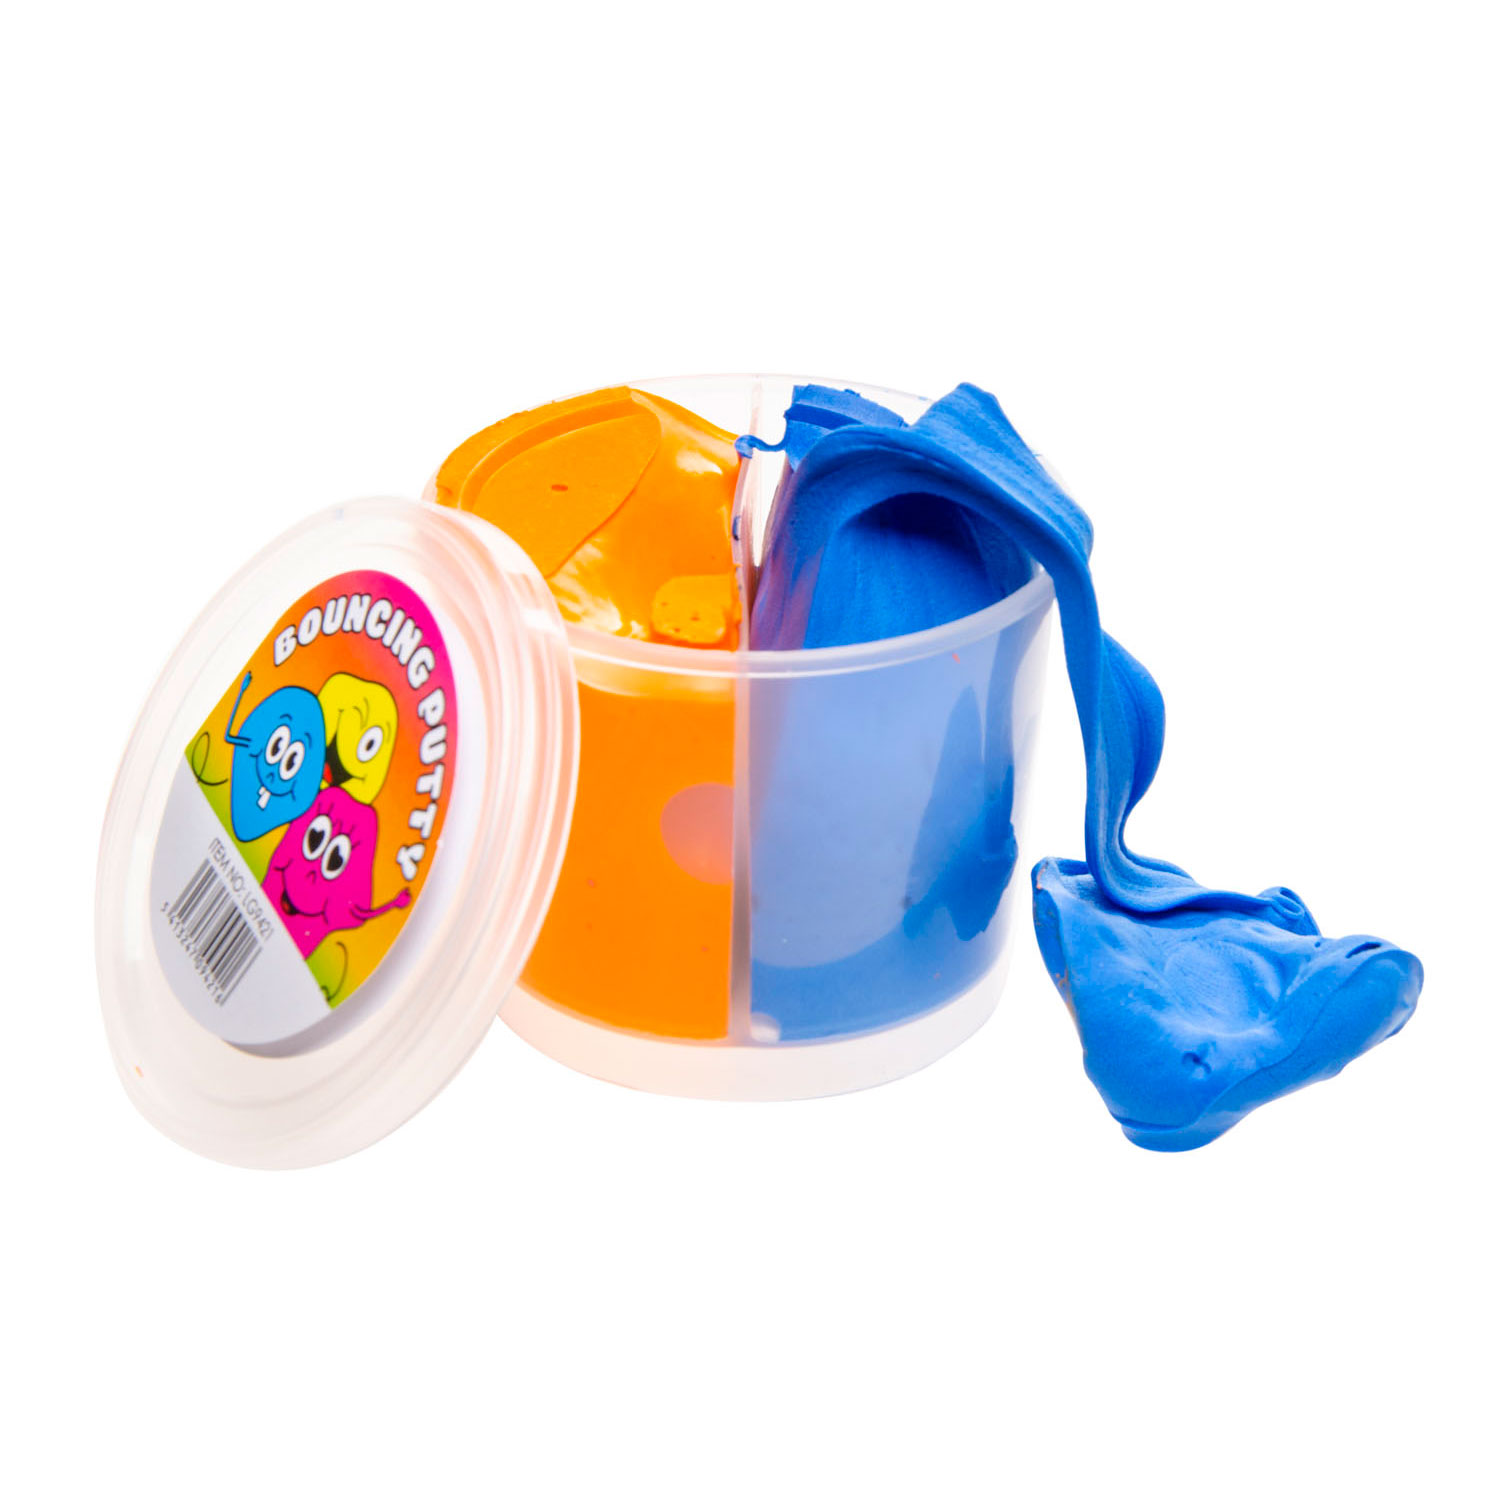 Bounce Putty Neon